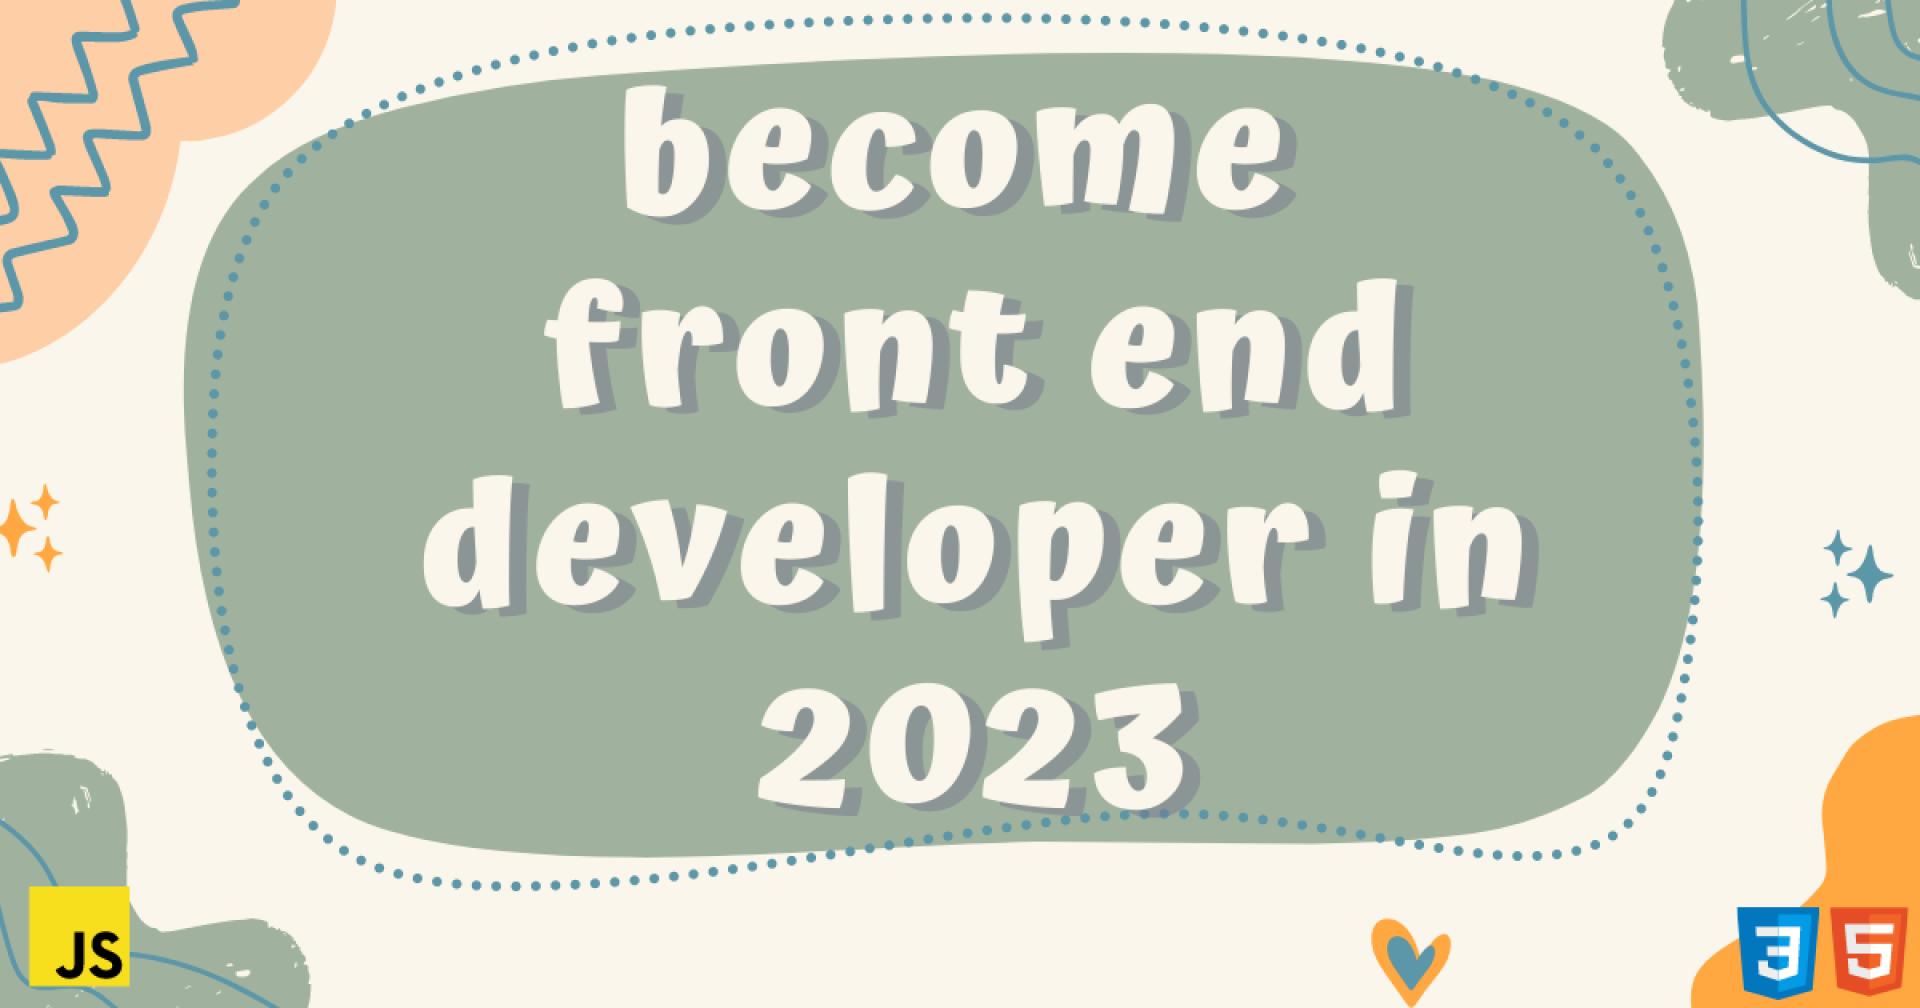 Guide: How to become front end developer in 2023?